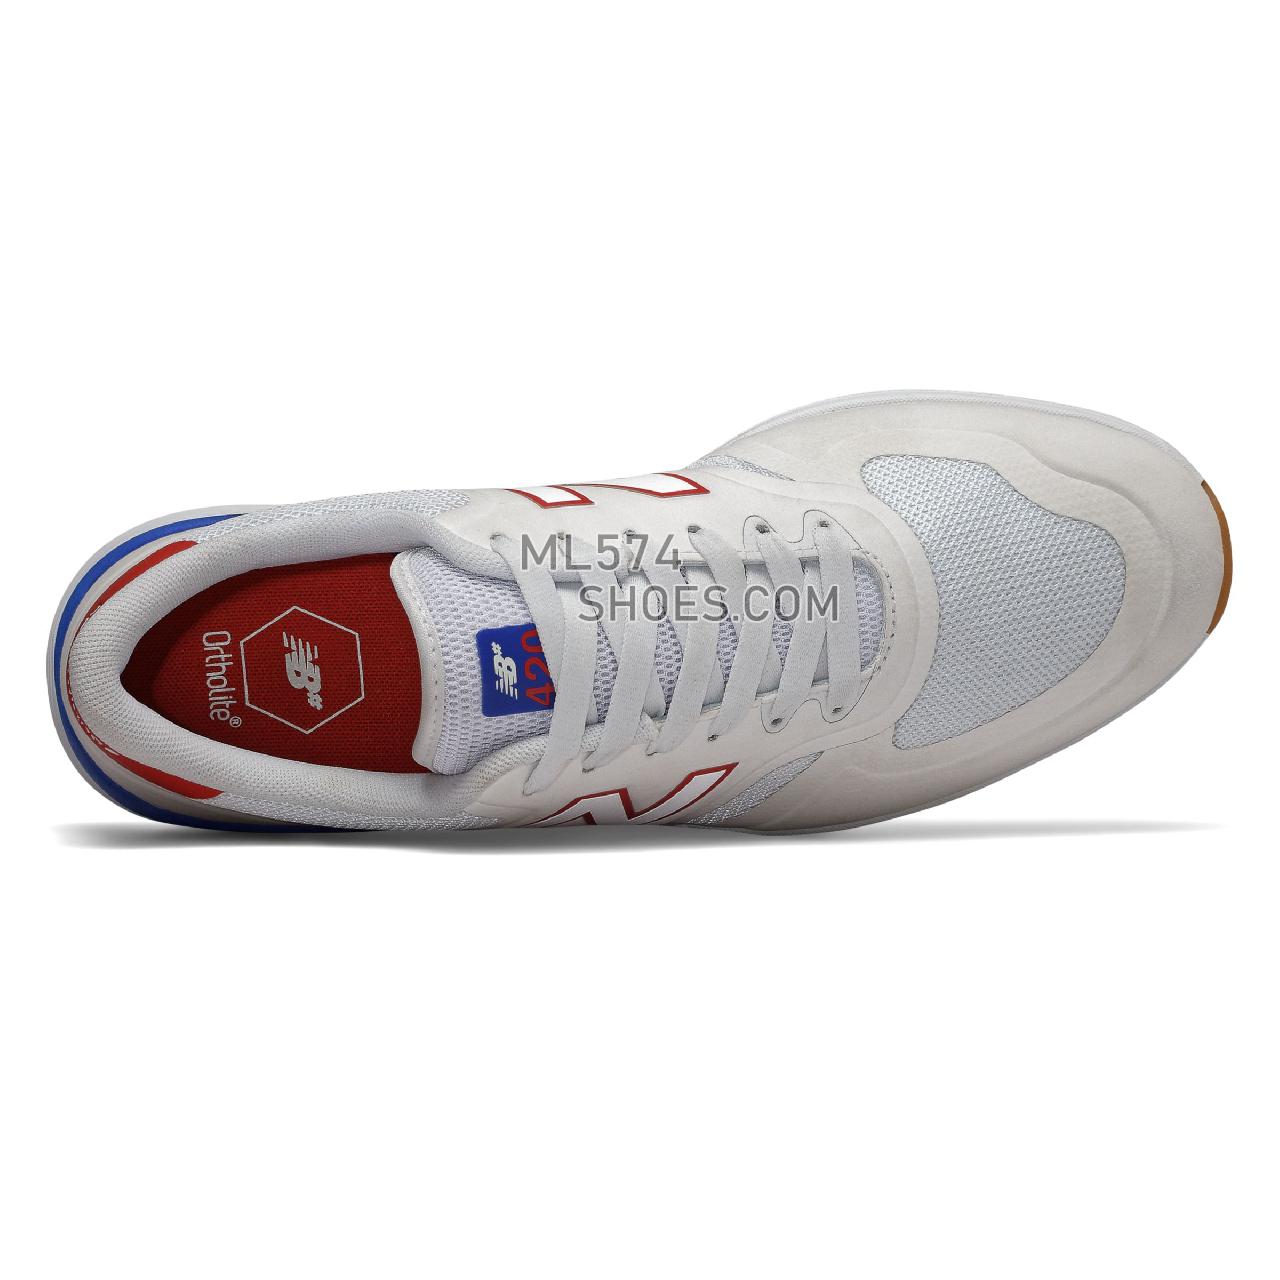 New Balance Numeric 420 - Men's NB Numeric Skate - White with Red - NM420SSR